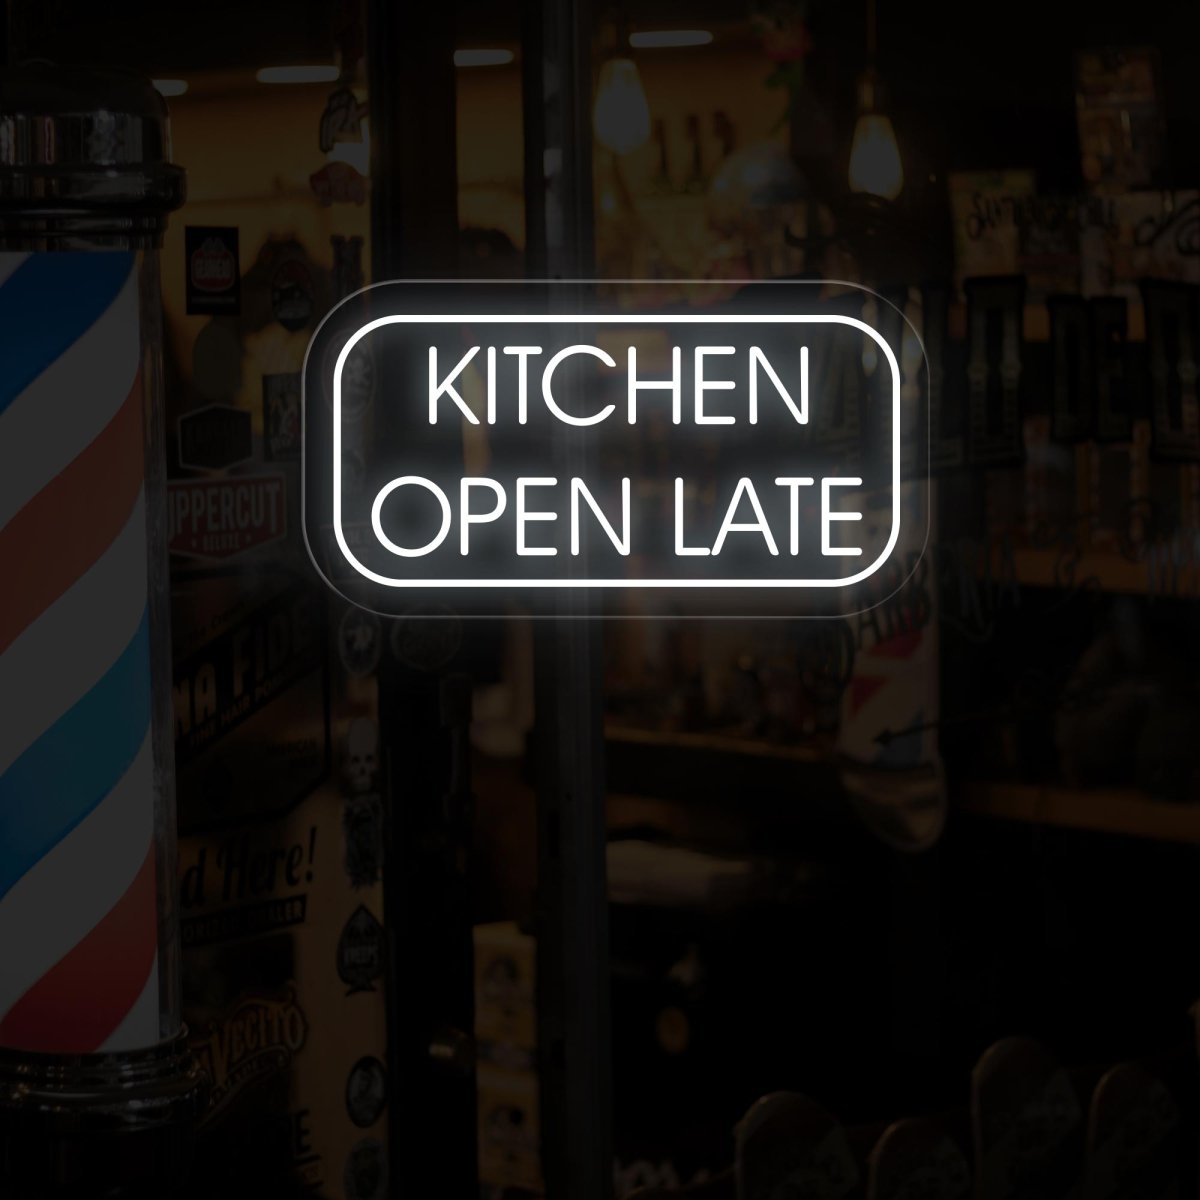 Kitchen Open Late LED Neon Sign: Illuminate Your Space - NEONXPERT